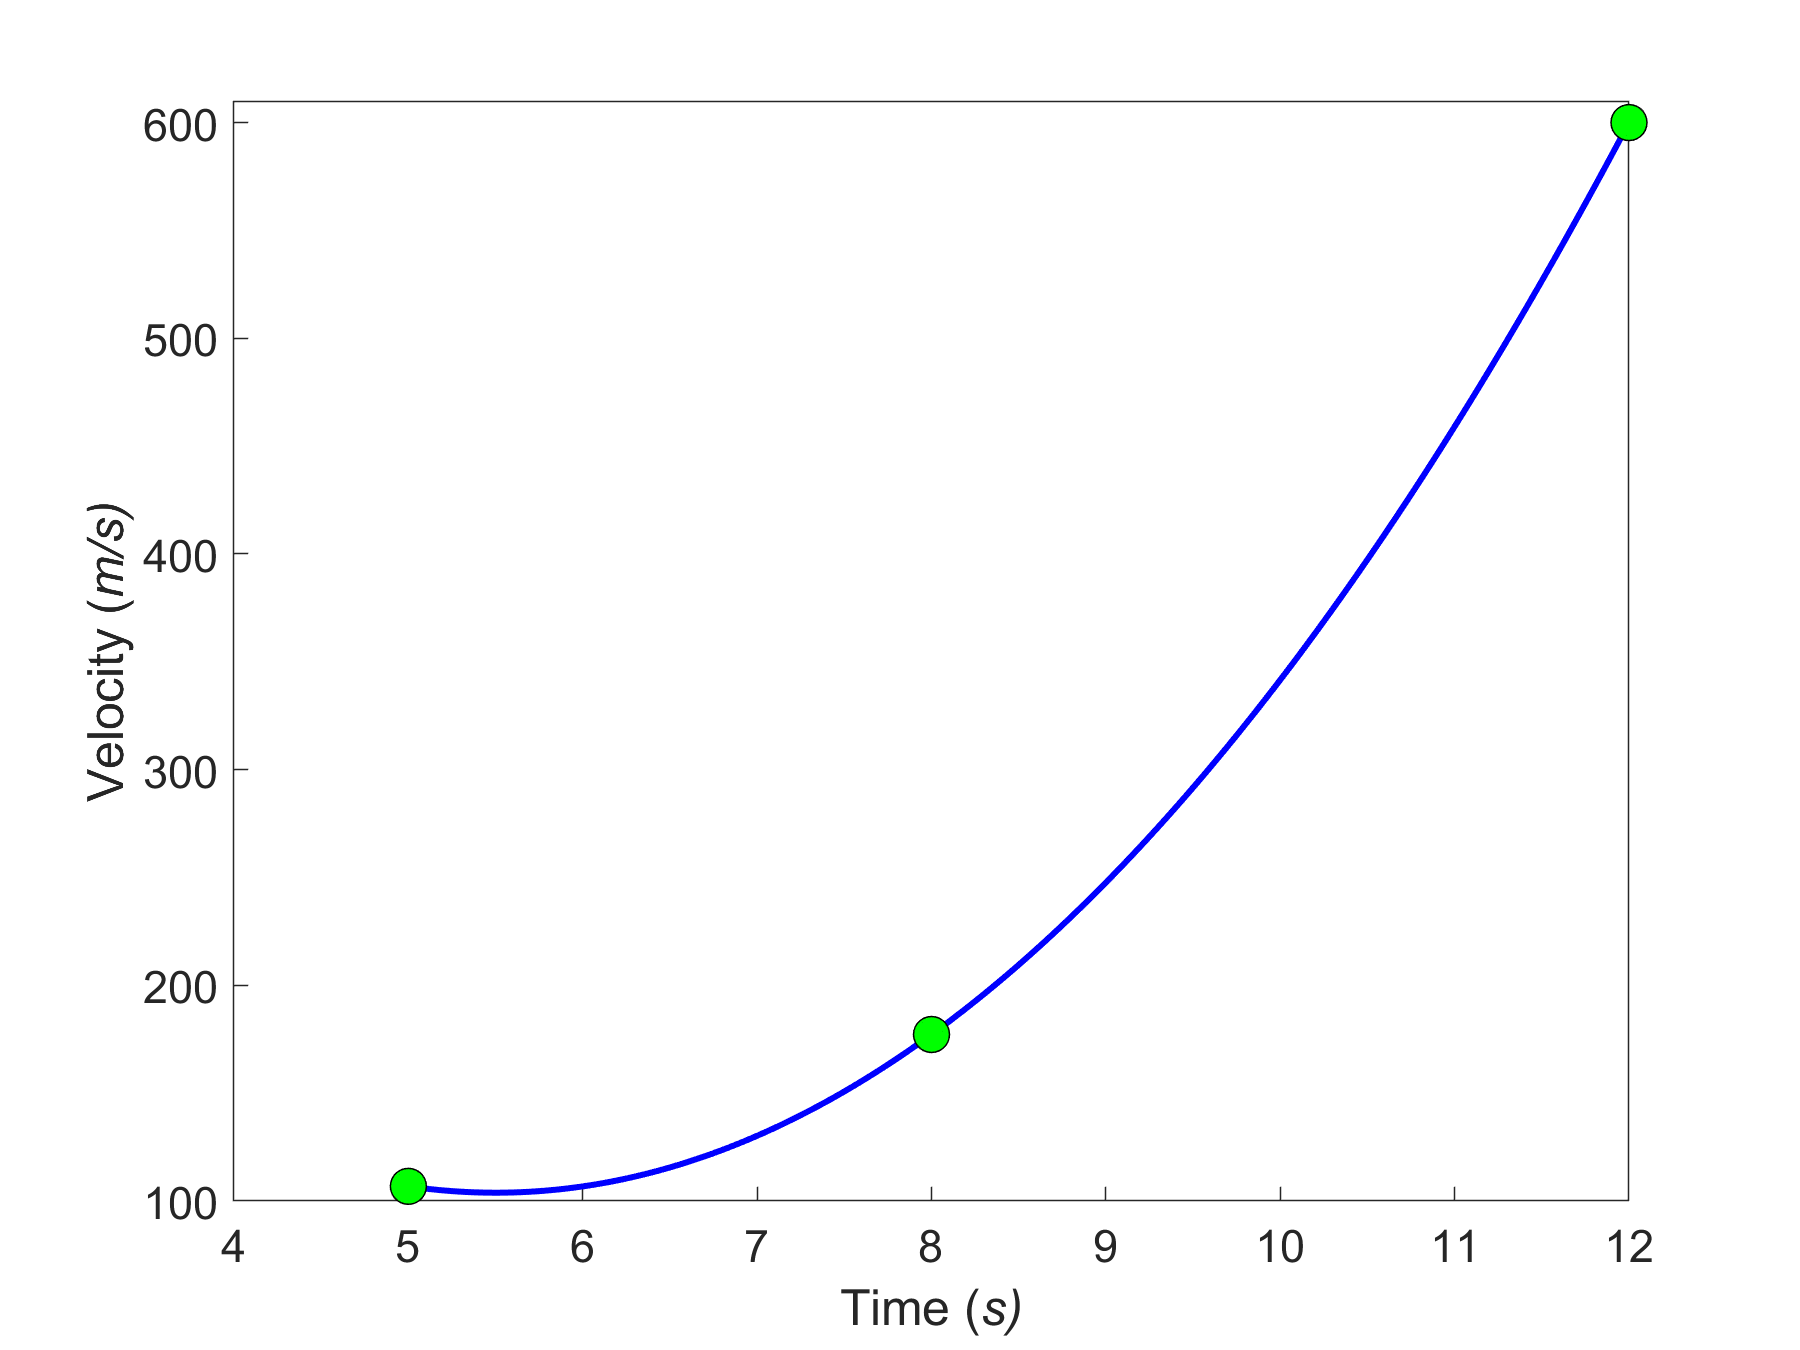 Second-order interpolant for velocity vs. time values given in Table 1.1.3.1.